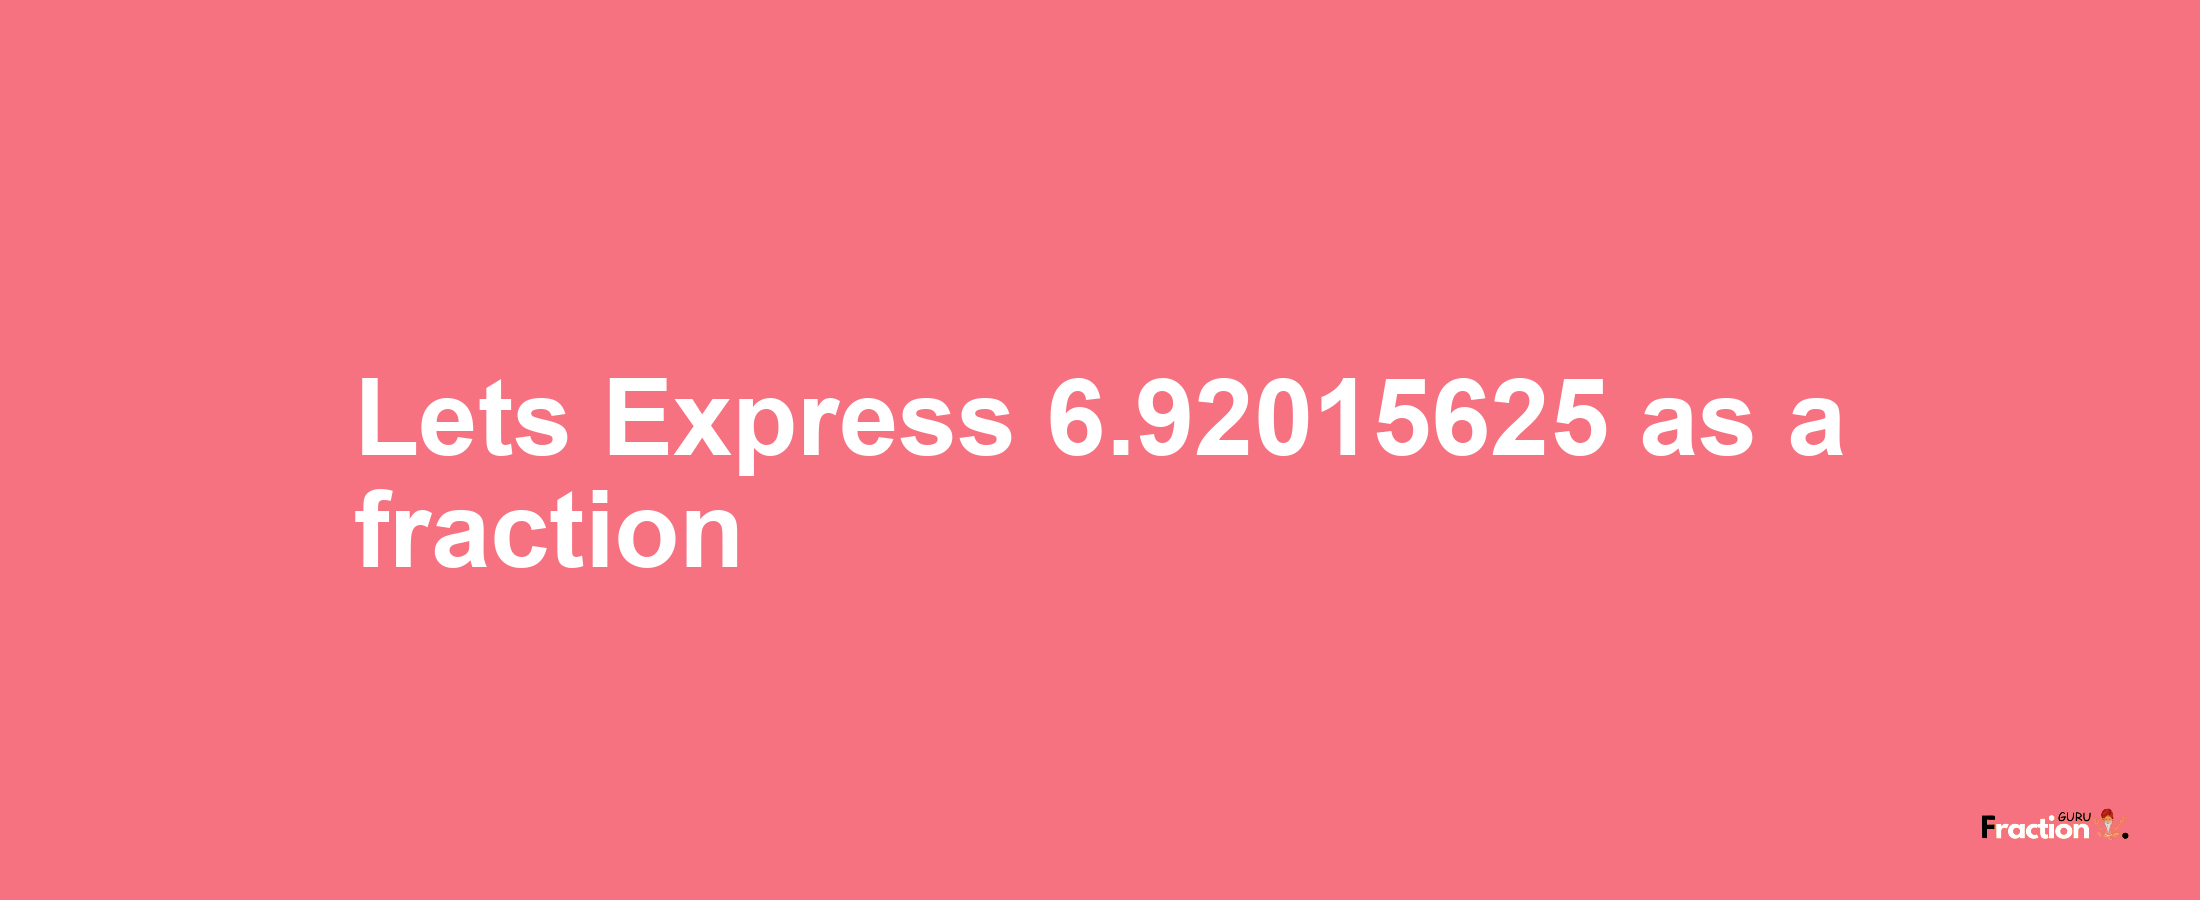 Lets Express 6.92015625 as afraction